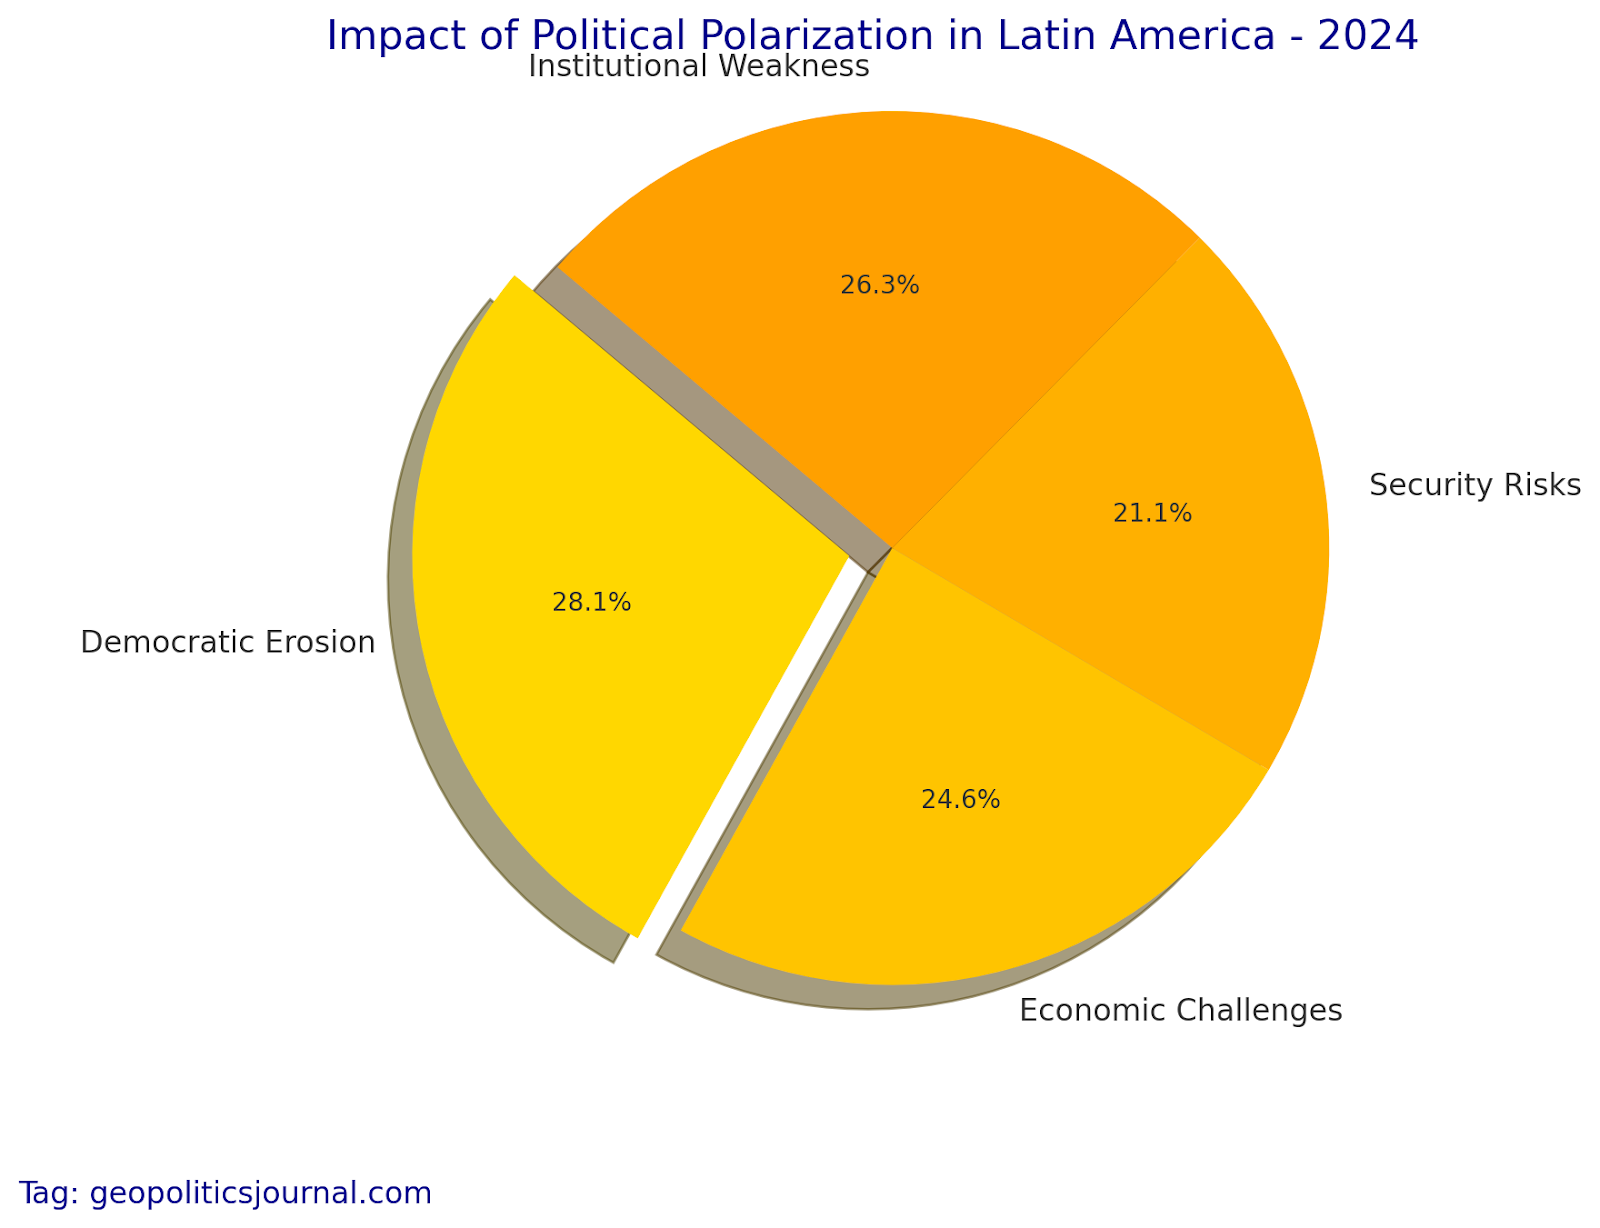 The visualization represents the impact of political polarization in Latin America in 2024, focusing on key areas such as Democratic Erosion, Economic Challenges, Security Risks, and Institutional Weakness. The data highlights the significant toll political polarization is taking on the region's democracy, economy, security, and institutions, with Democratic Erosion being the most affected area.